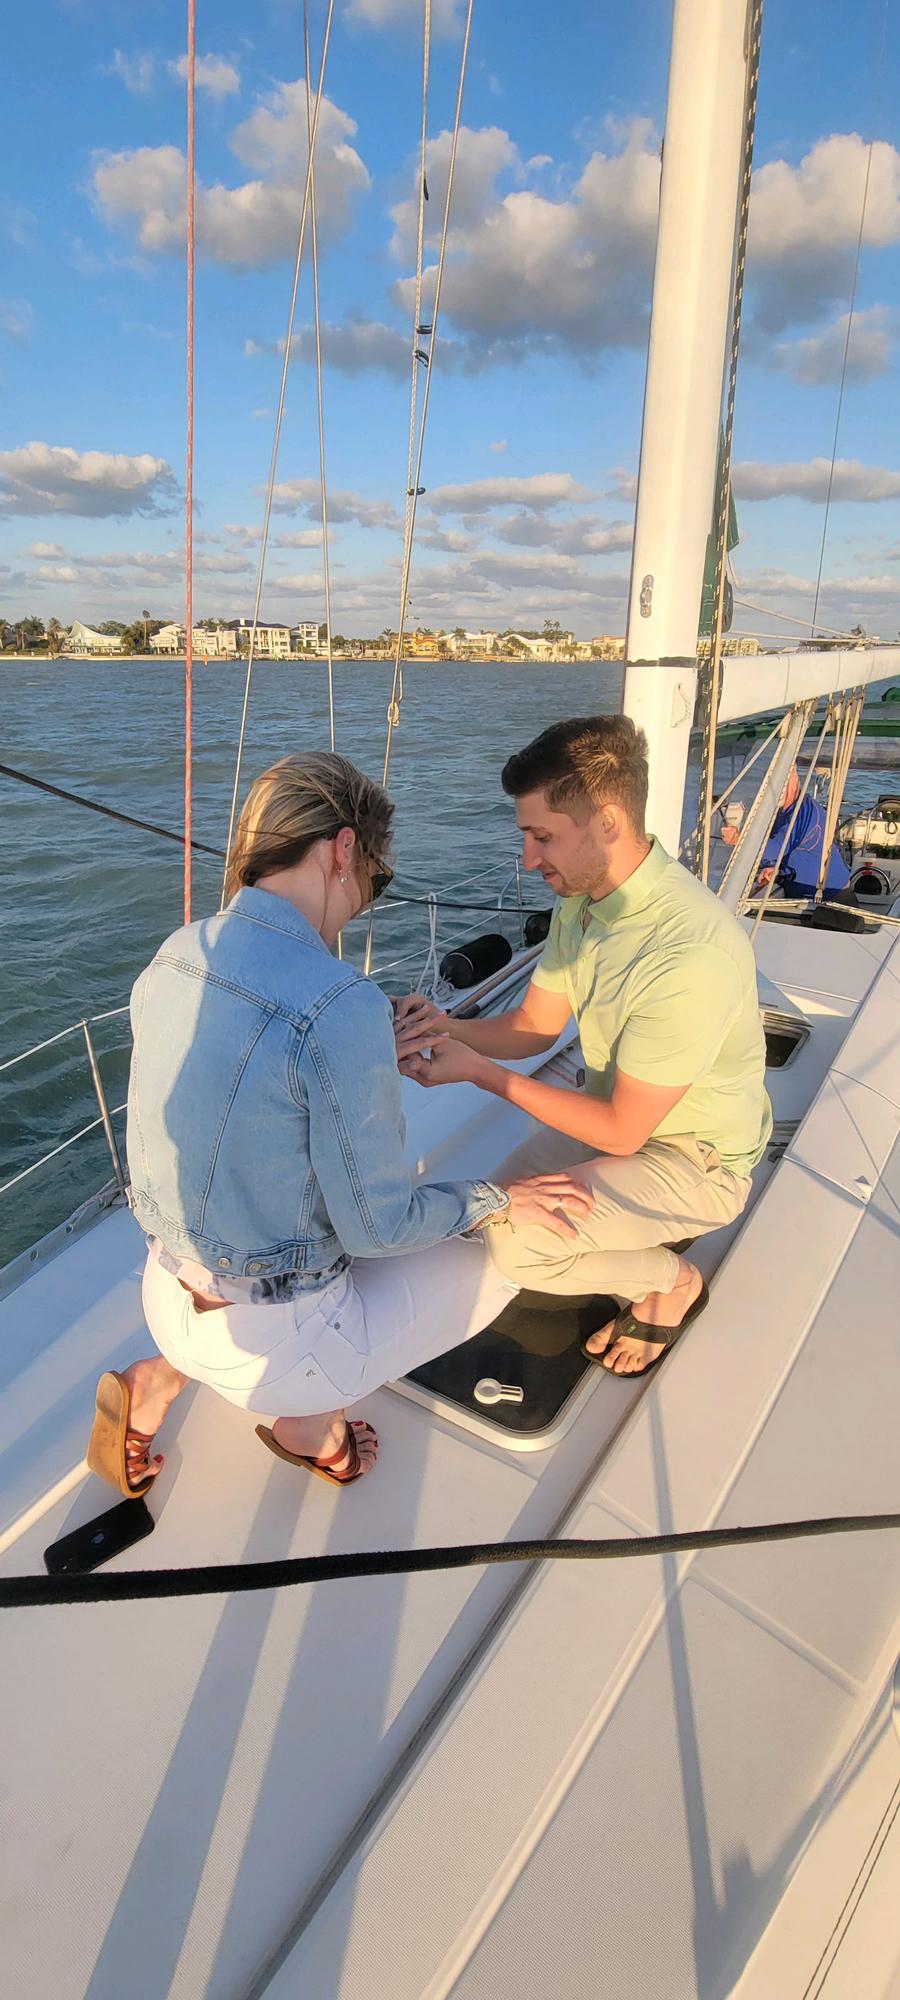 When Emily turned around, Conor was on his knee and proposed in one of their favorite places -- the ocean!